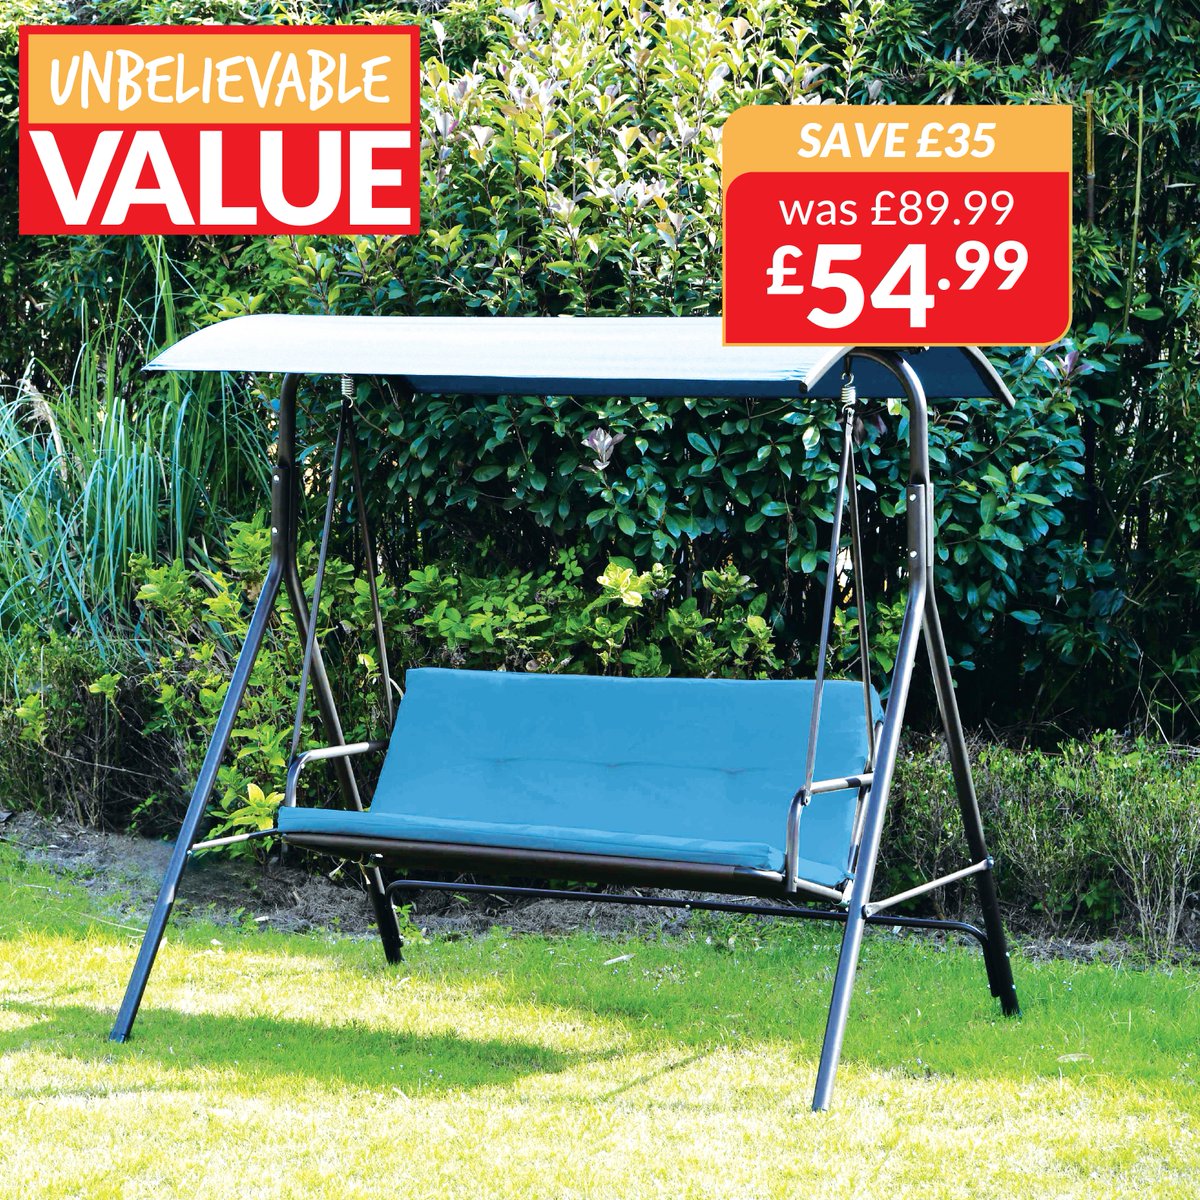 💥 UNBELIEVABLE VALUE 💥 Start swinging 😍👉 Shop today & SAVE £35 OFF the Sardina Swing, NOW only £54.99! bit.ly/4b7cSwP ✨ Cushions and canopy included! 🏃 ➡️ 🛒Available IN-STORES & ONLINE 🖱️ Click & Collect available in as little as 1 hour!